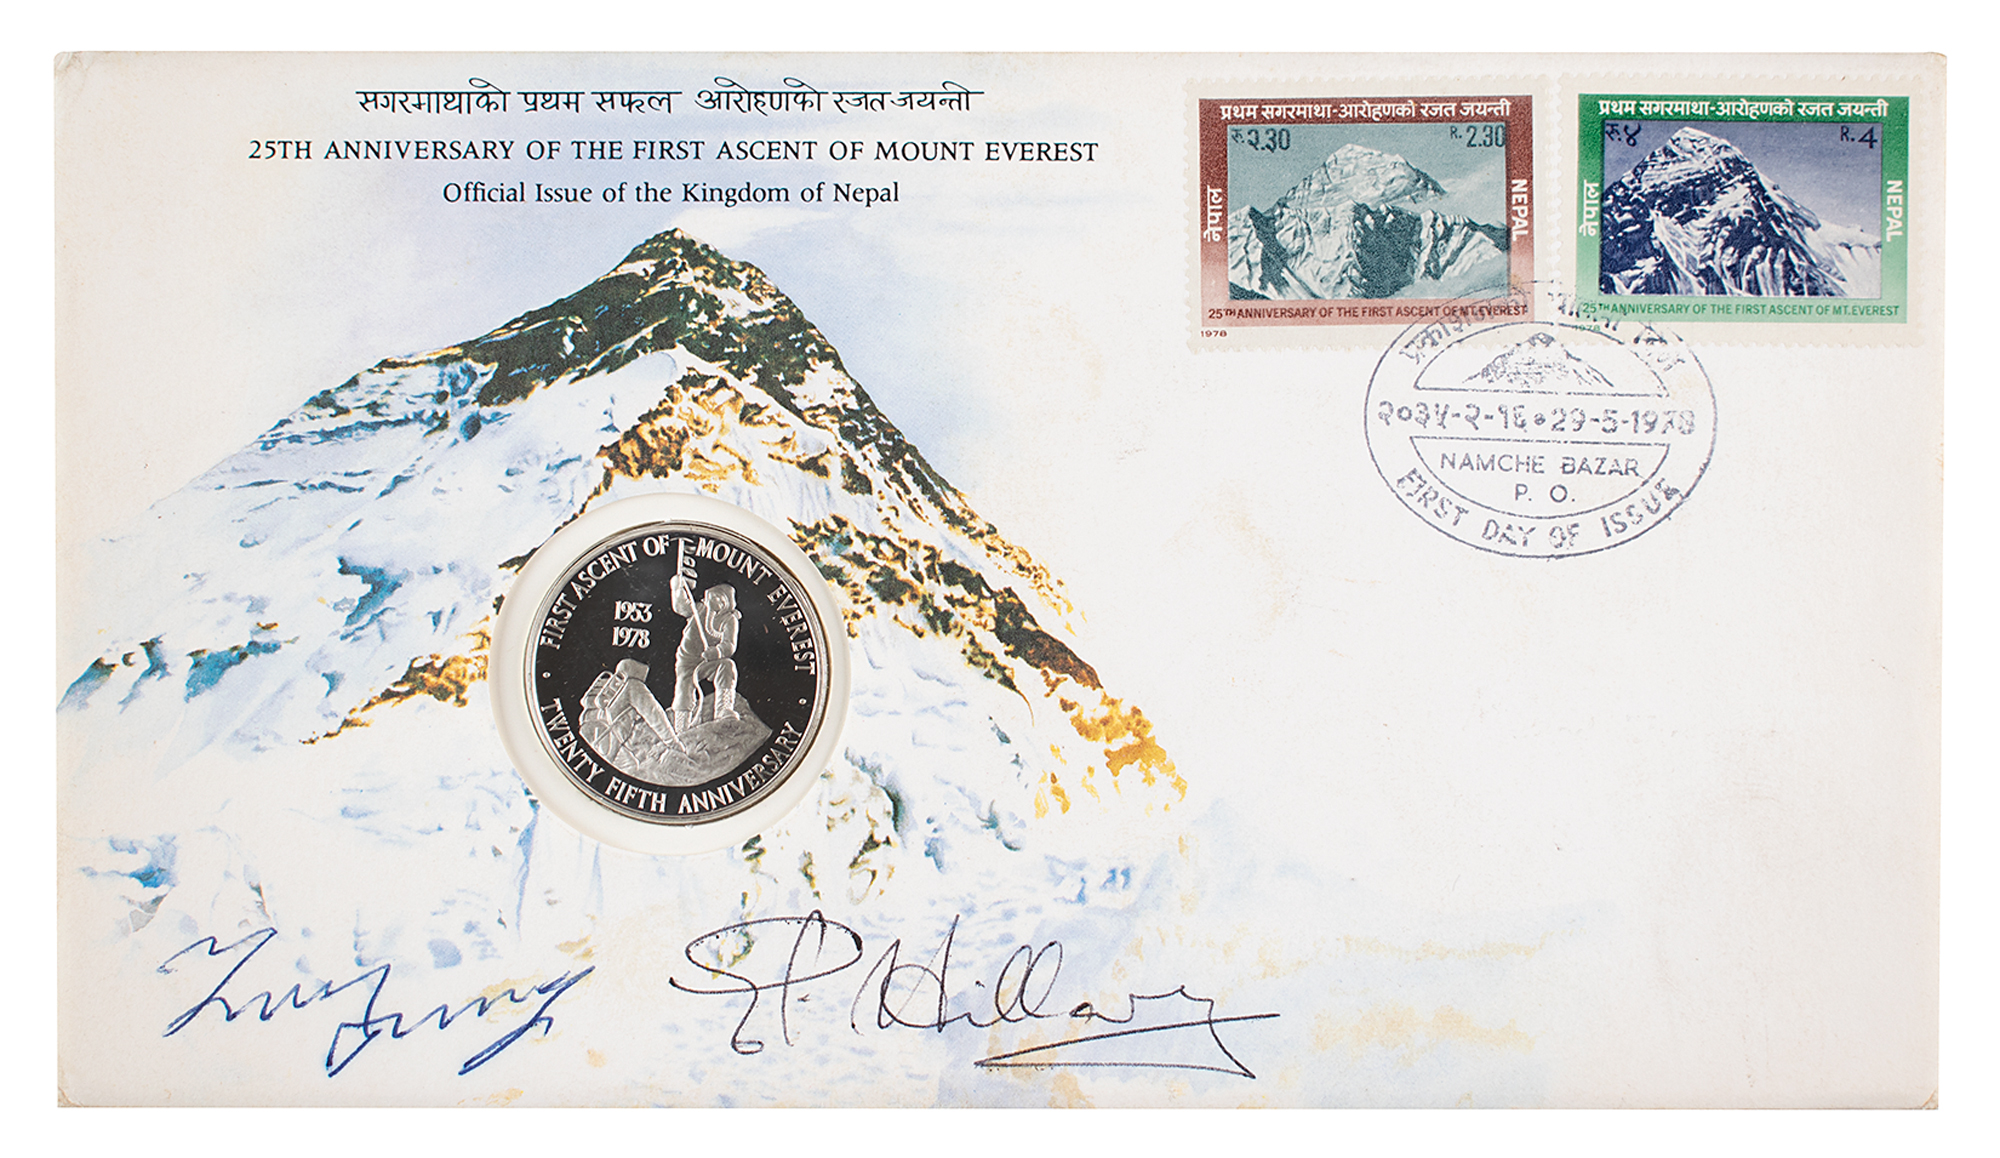 Lot #278 Edmund Hillary and Tenzing Norgay Signed Commemorative Cover